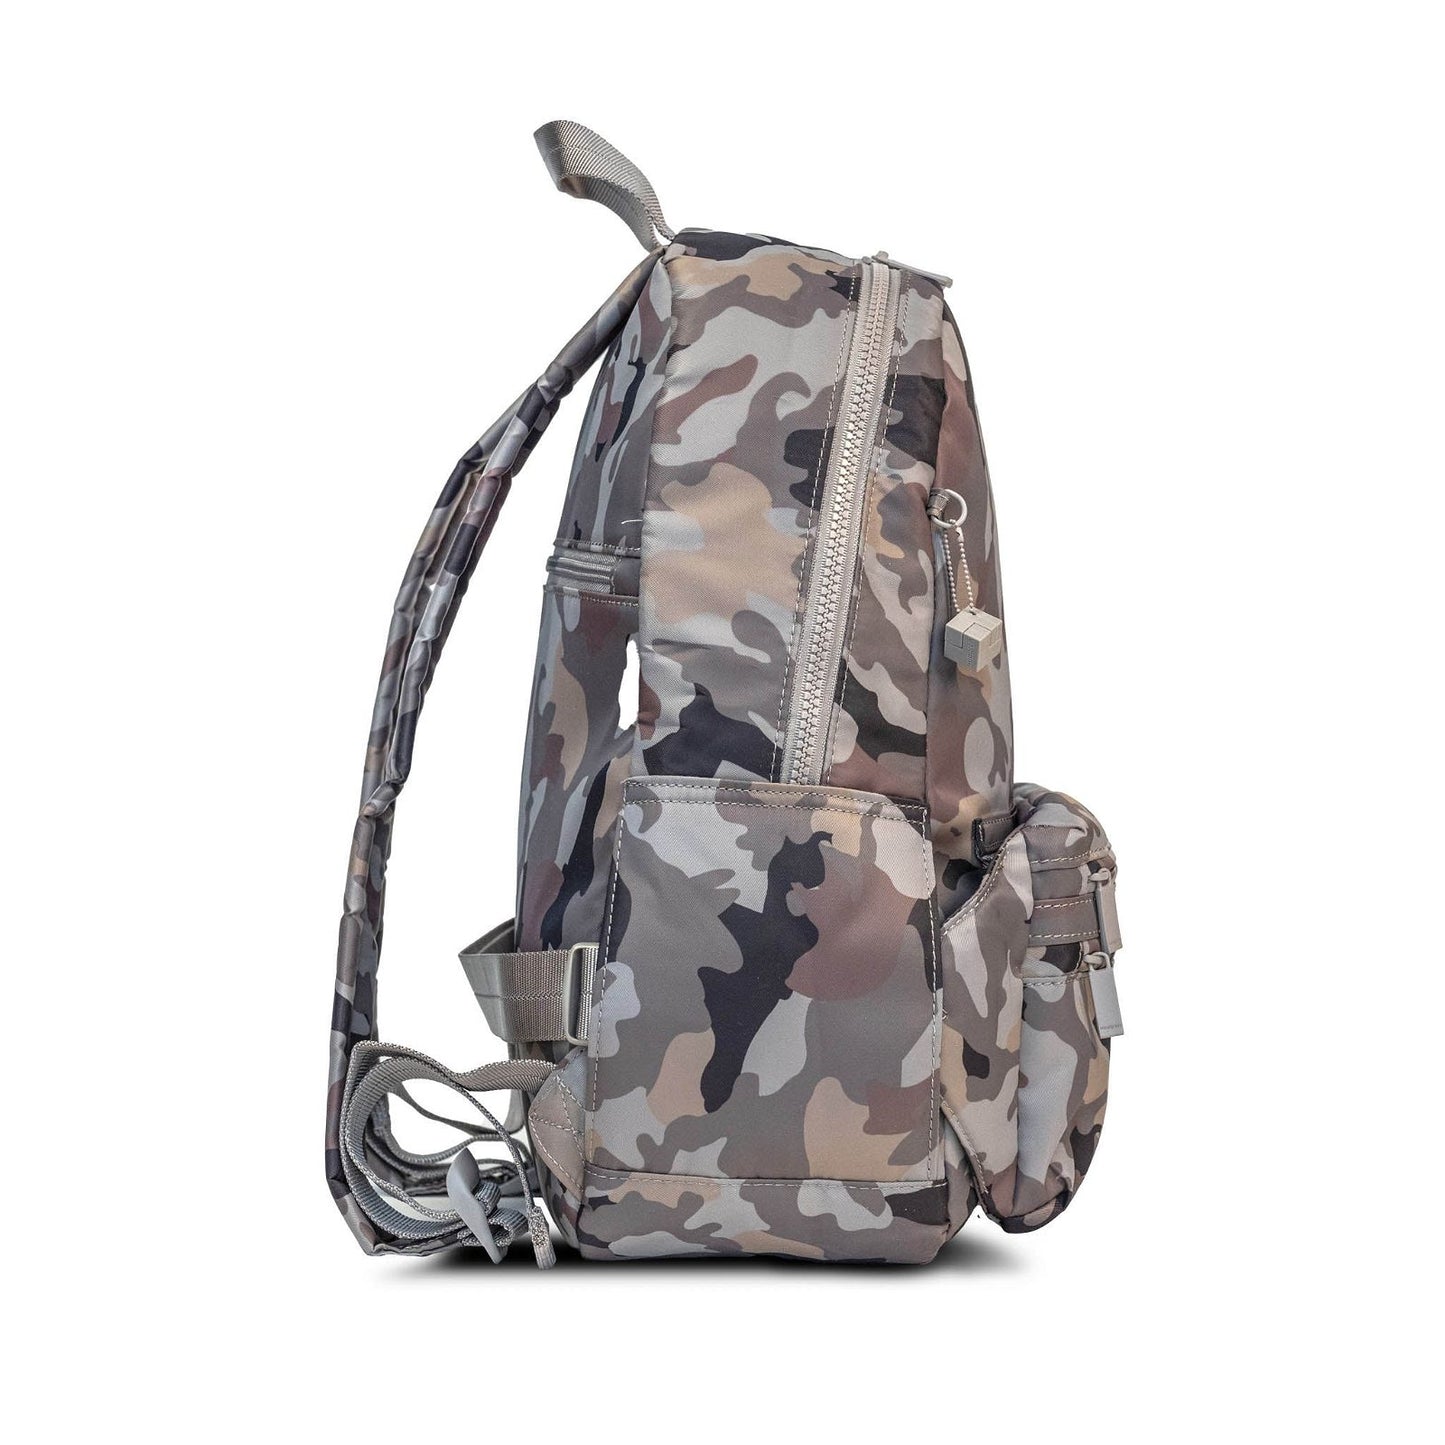 Hedgren Earth Sustainably Made Backpack with Detachable Waist Pack - rainbowbags